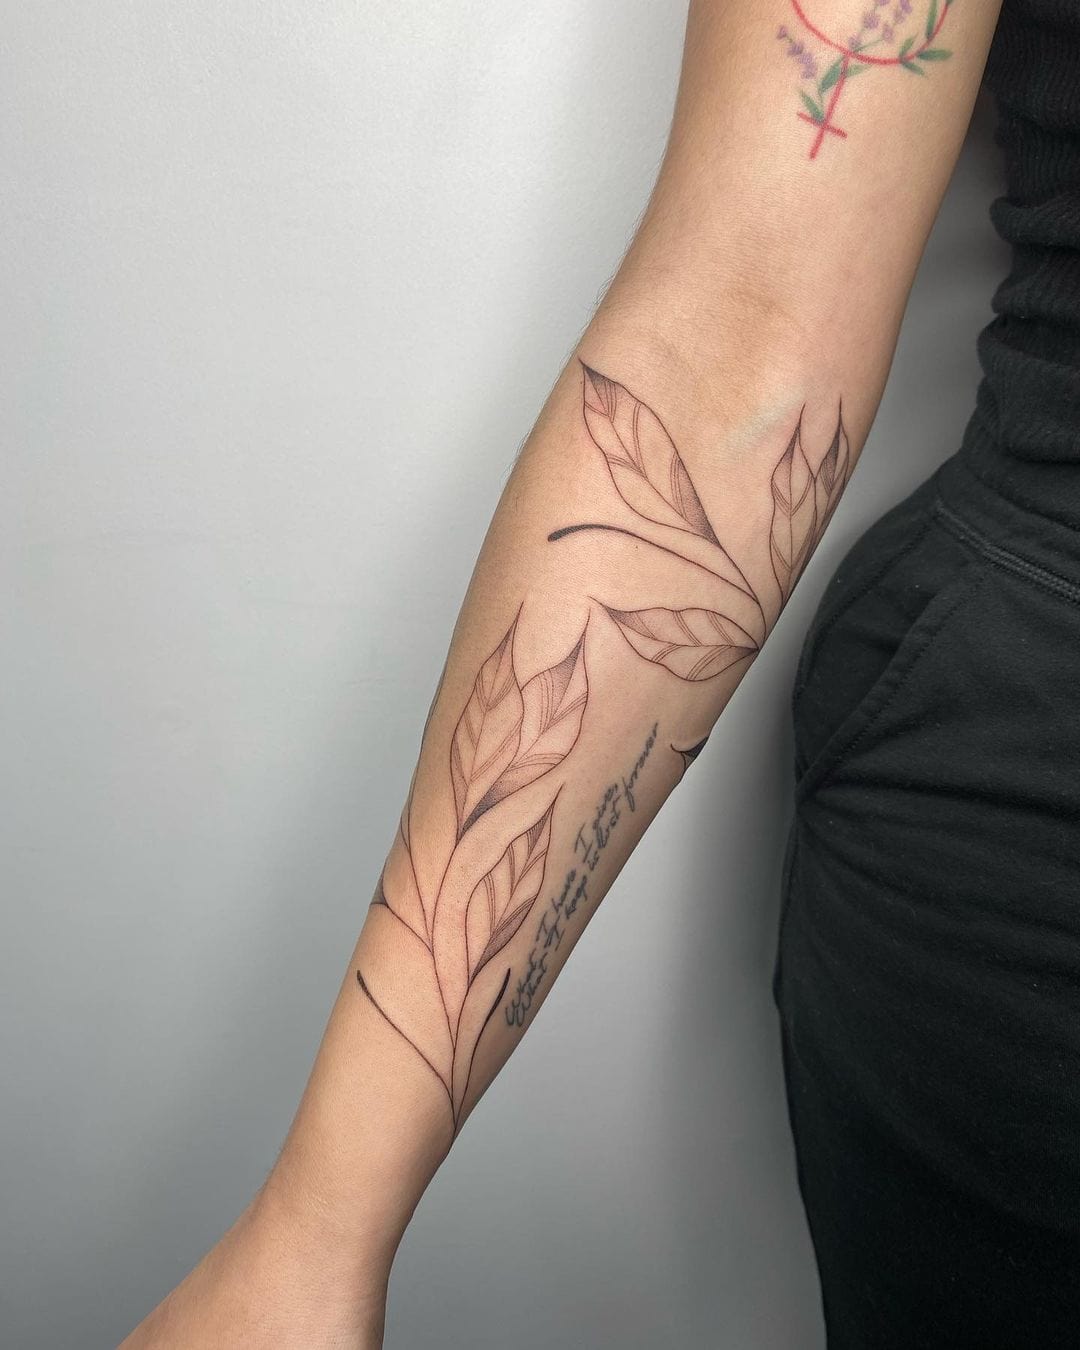 100 Arm Tattoo Ideas for Men and Women - The Body is a Canvas | Simple arm  tattoos, Small tattoos simple, Tattoos for women small